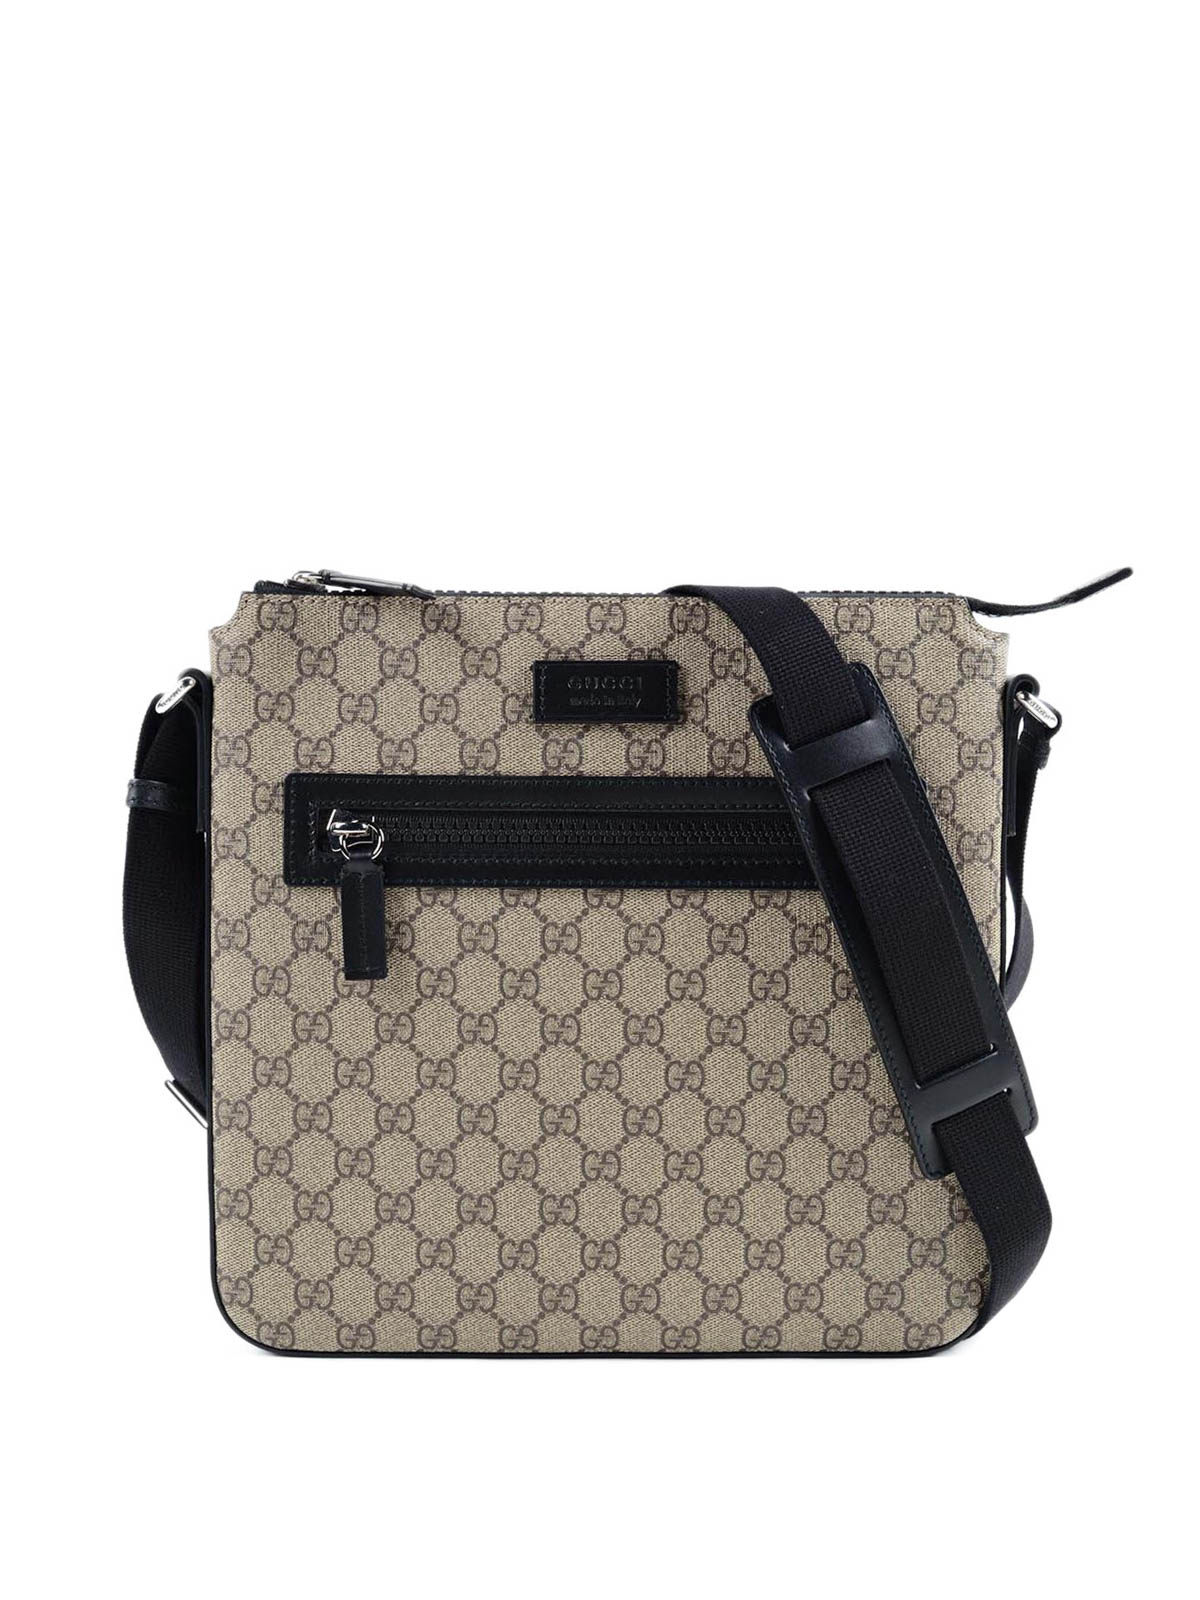 GG Supreme crossbody by Gucci - cross body bags | Shop online at www.paulmartinsmith.com